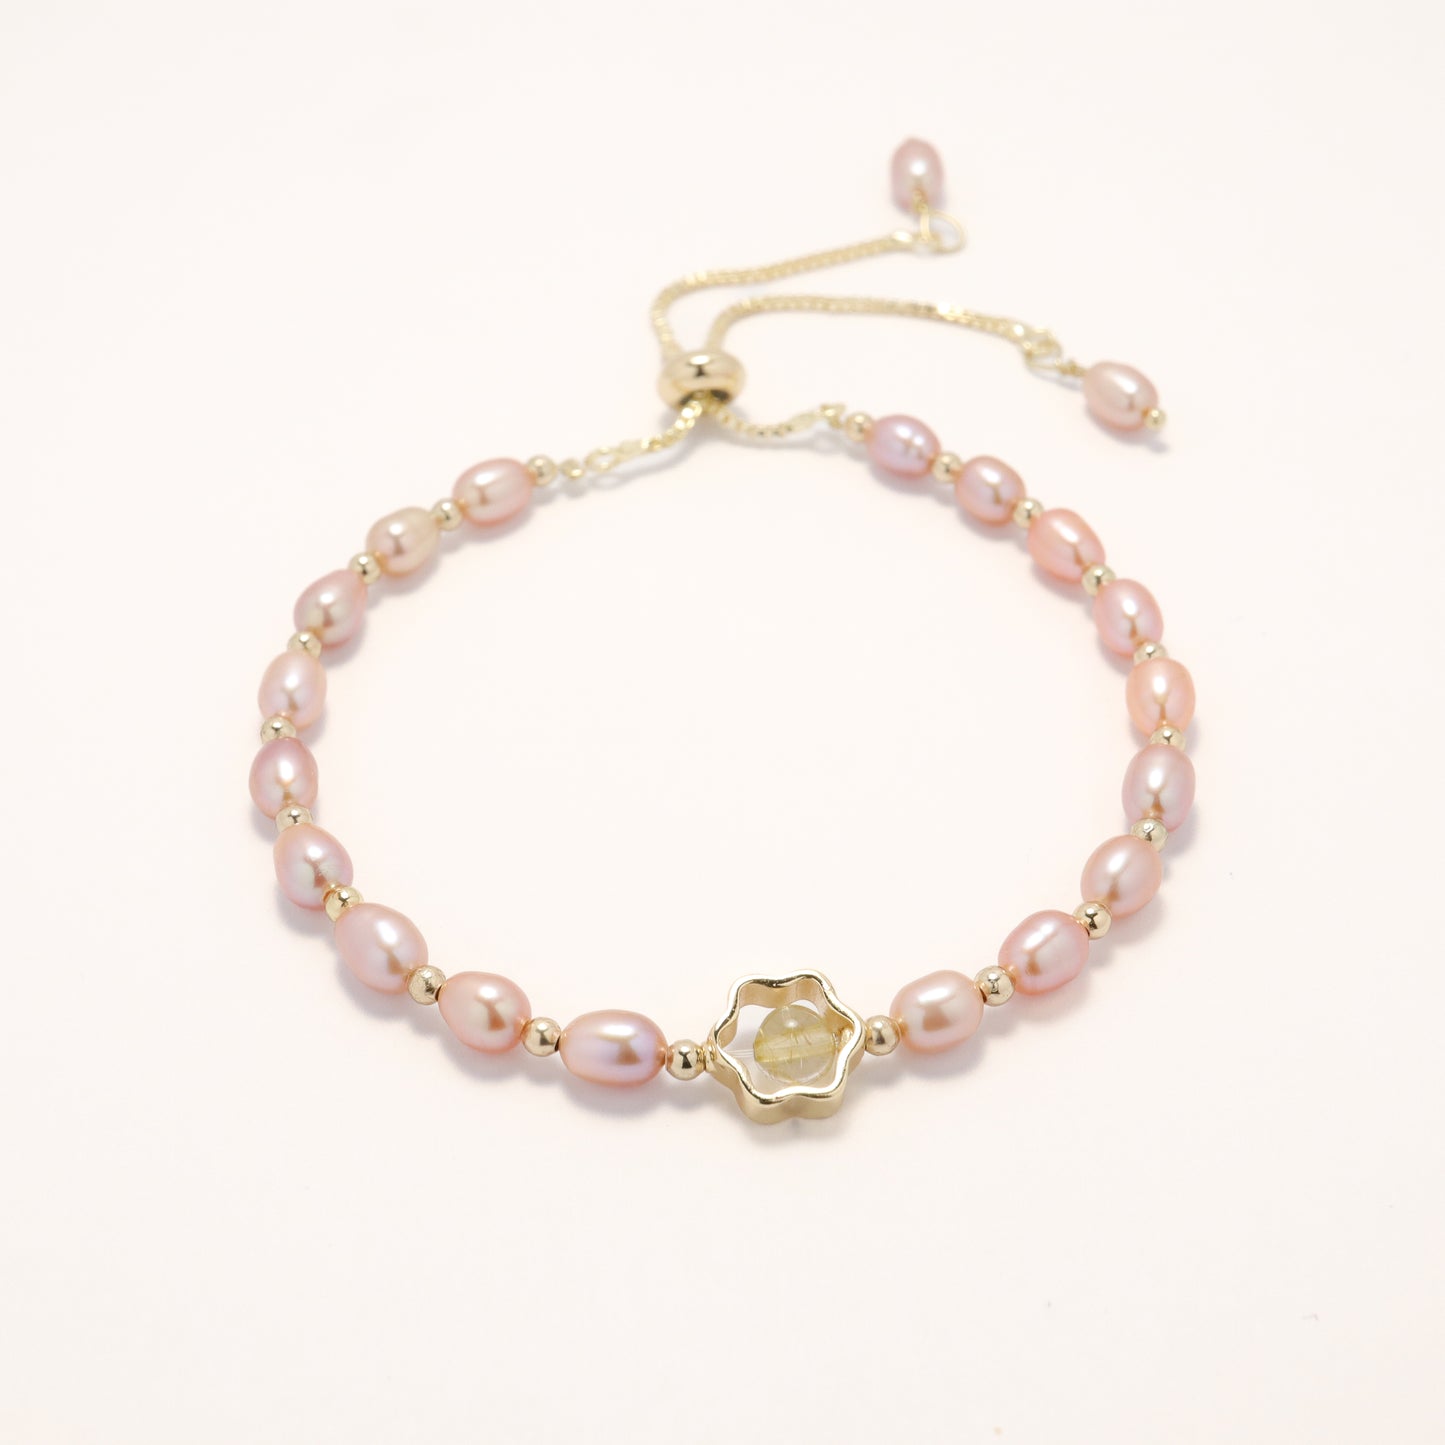 Pretty In Pink - Elegant Freshwater Pearl Bracelet with Adjustable Chain